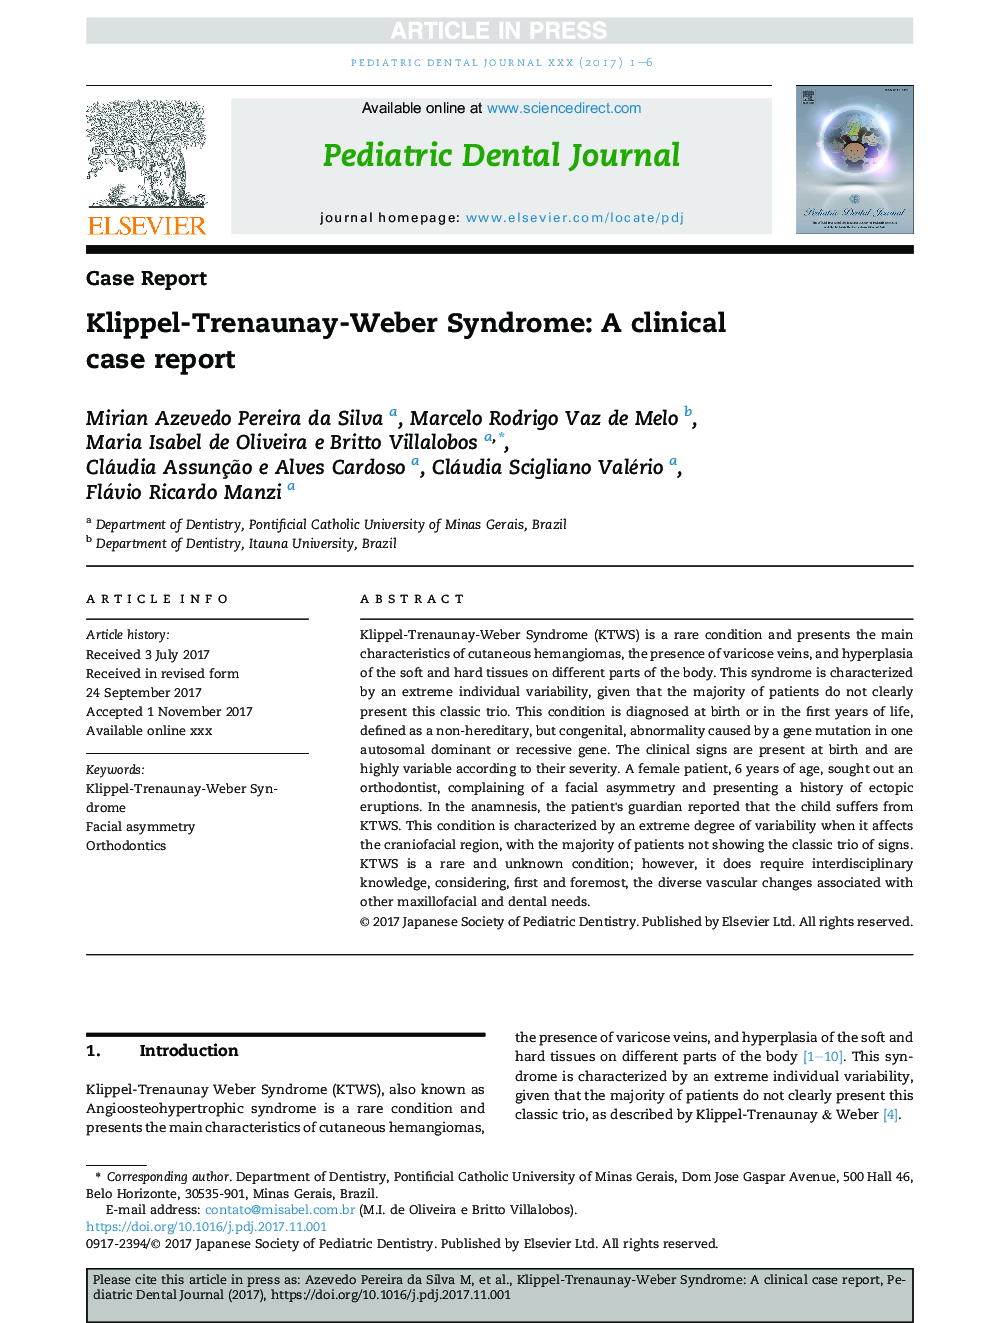 Klippel-Trenaunay-Weber Syndrome: A clinical case report